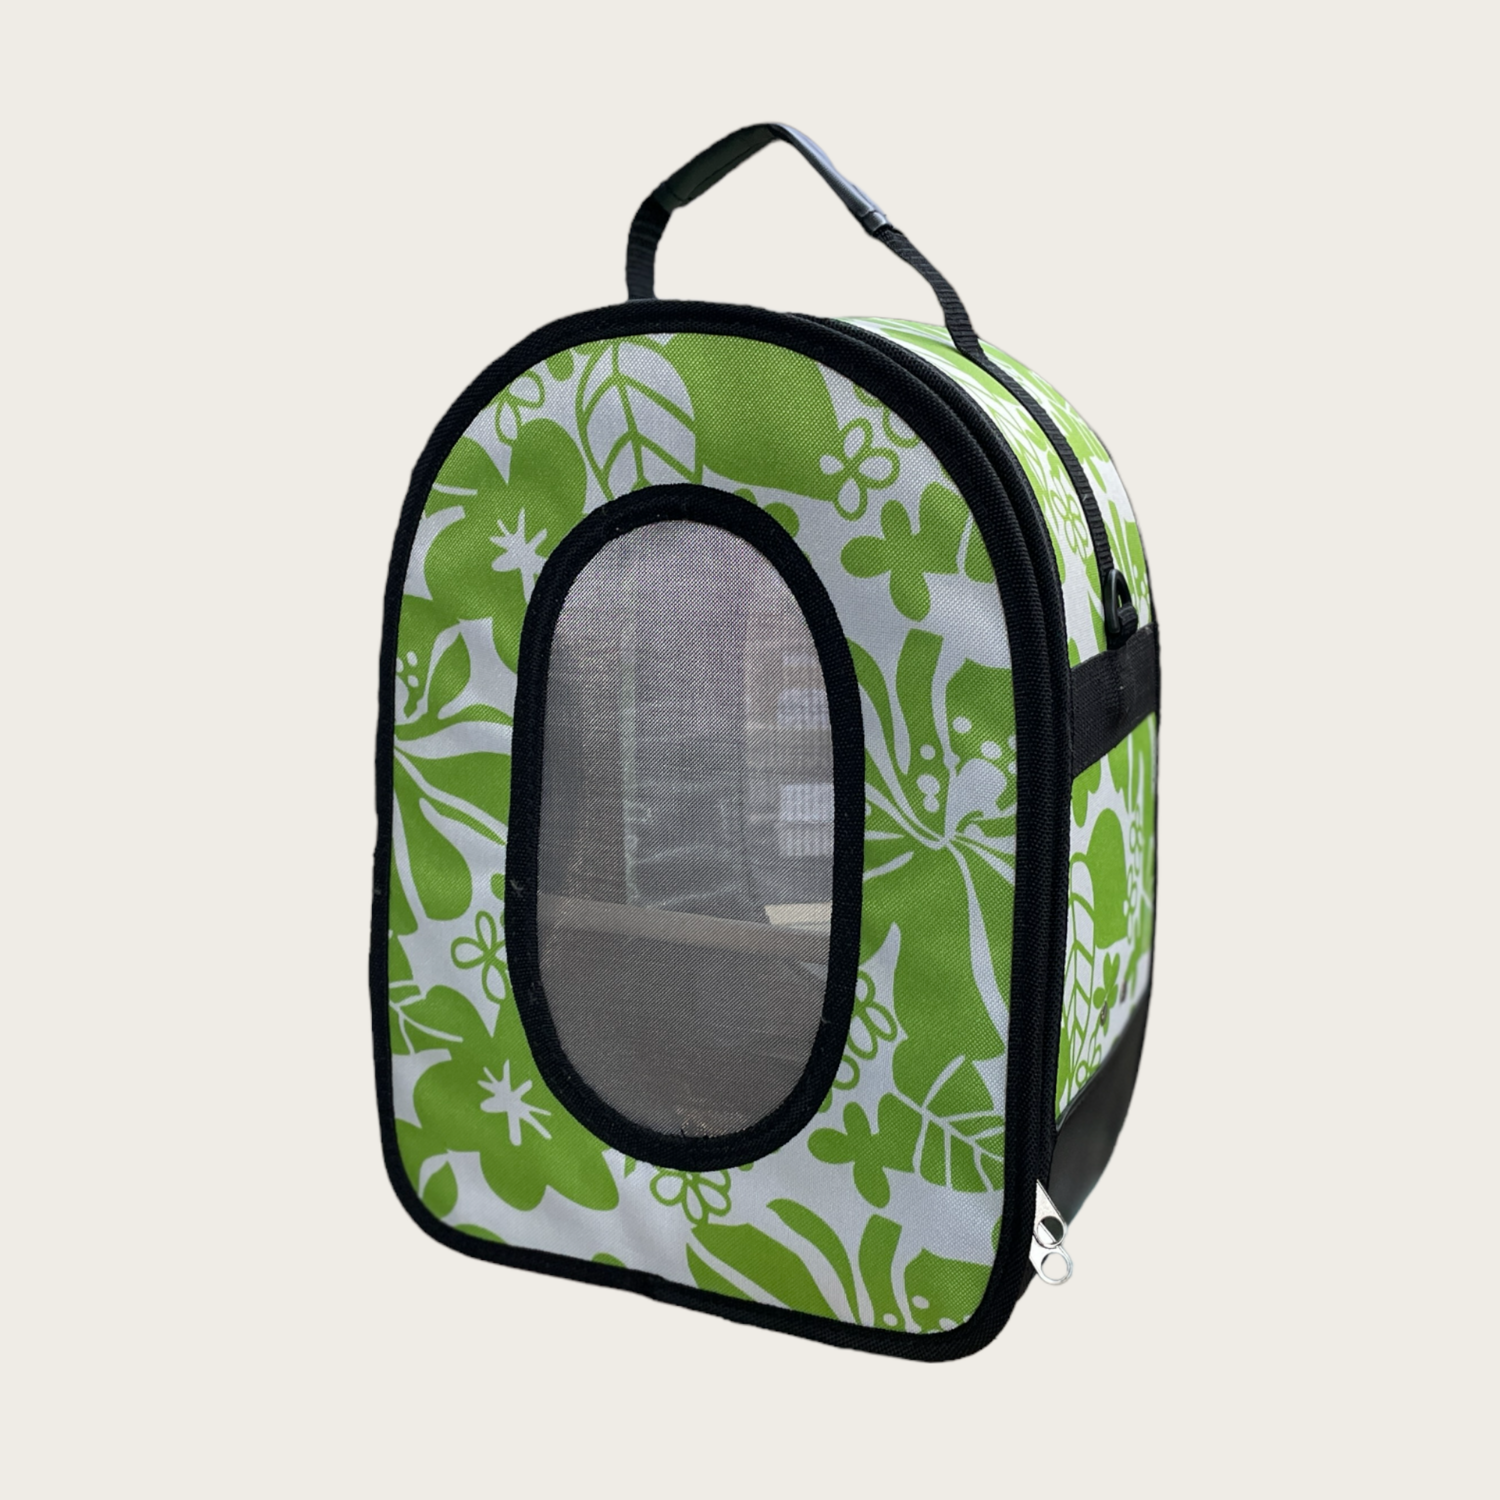 Small Green Soft Sided Carrier